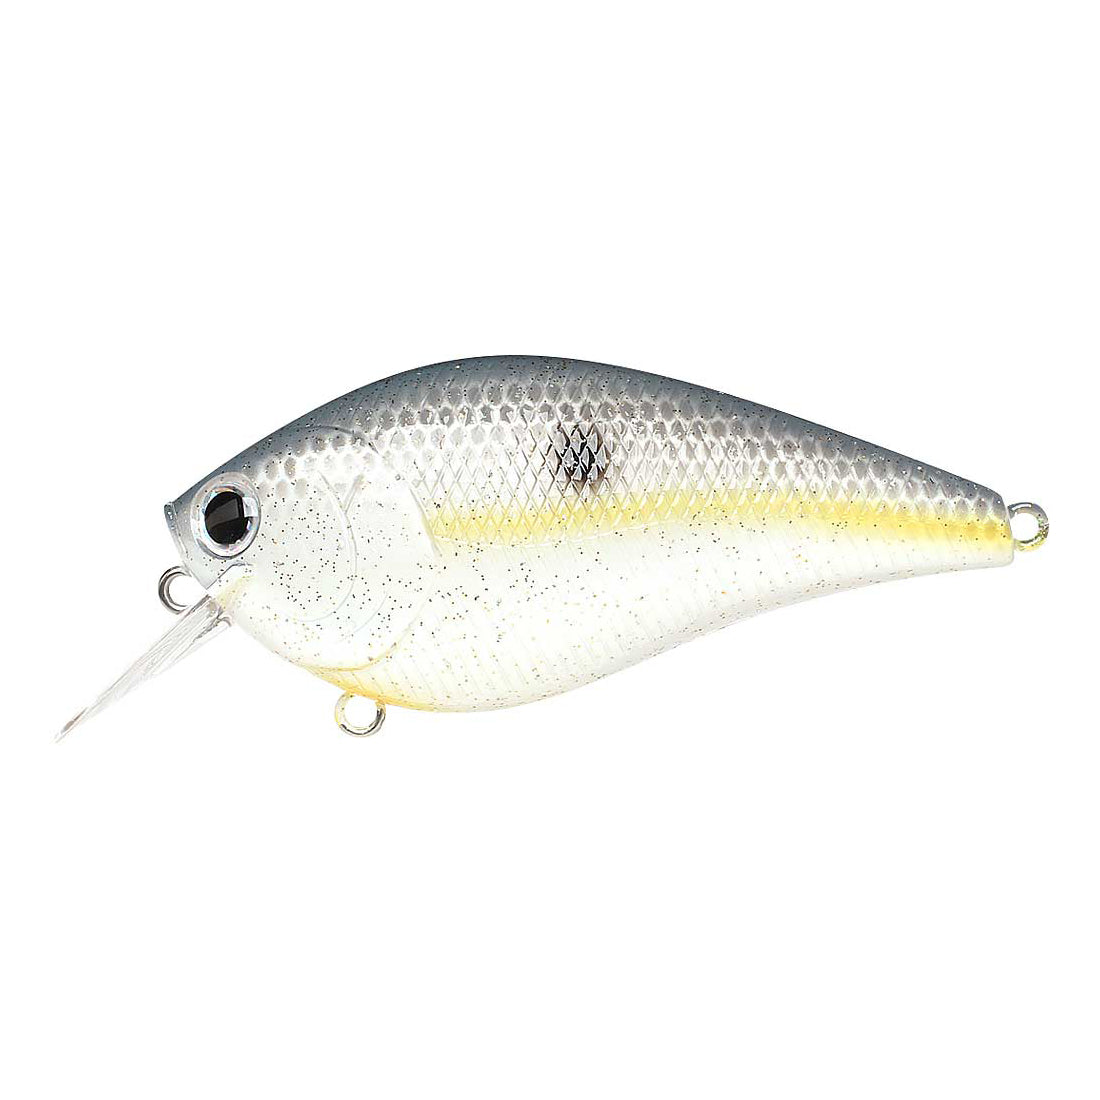 Sexy Chartreuse Shad